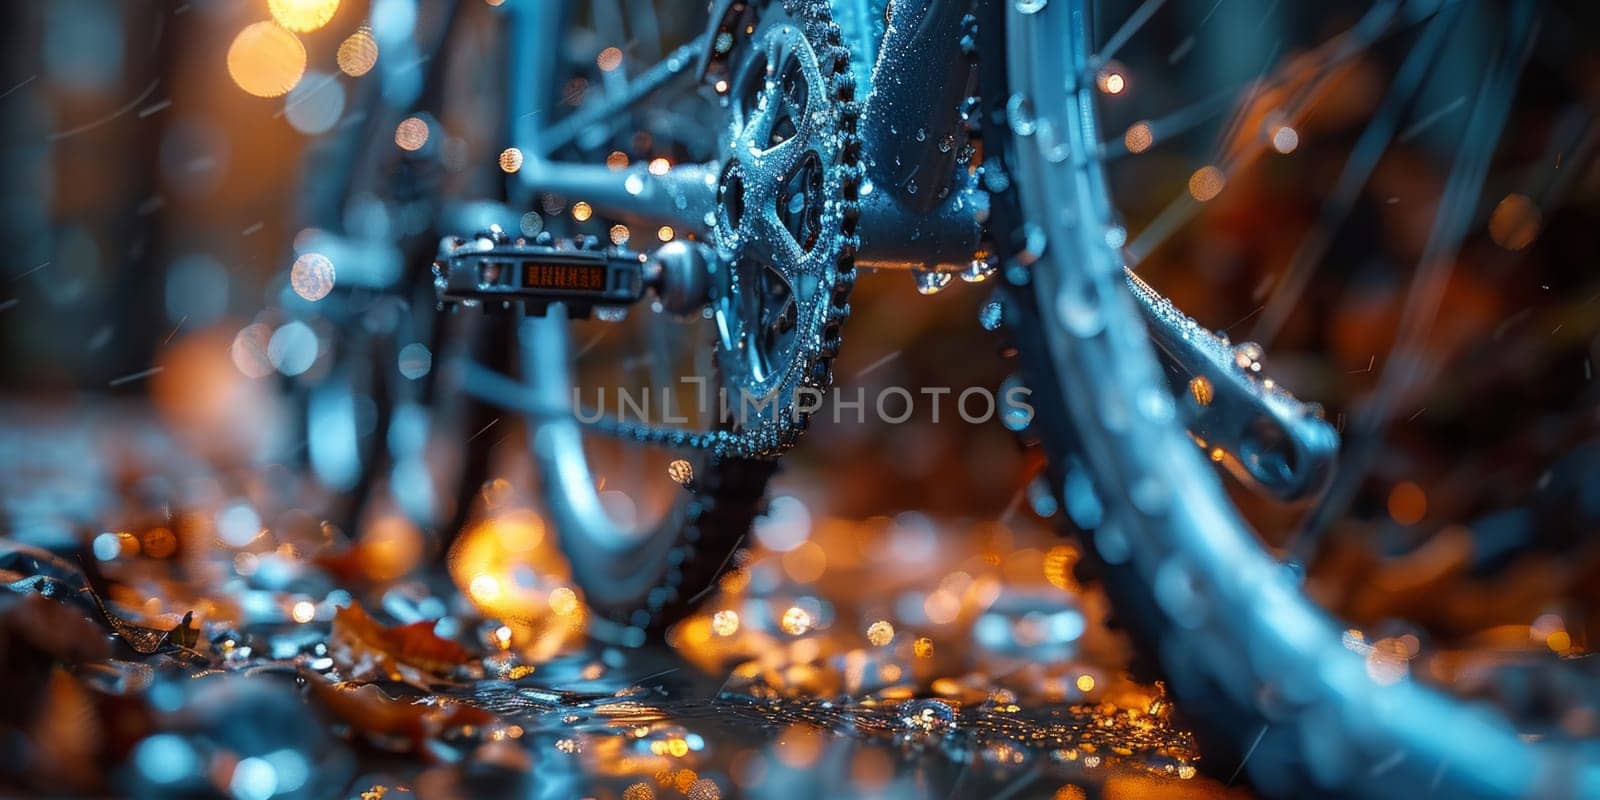 Water Droplets on Close Up Bike by but_photo